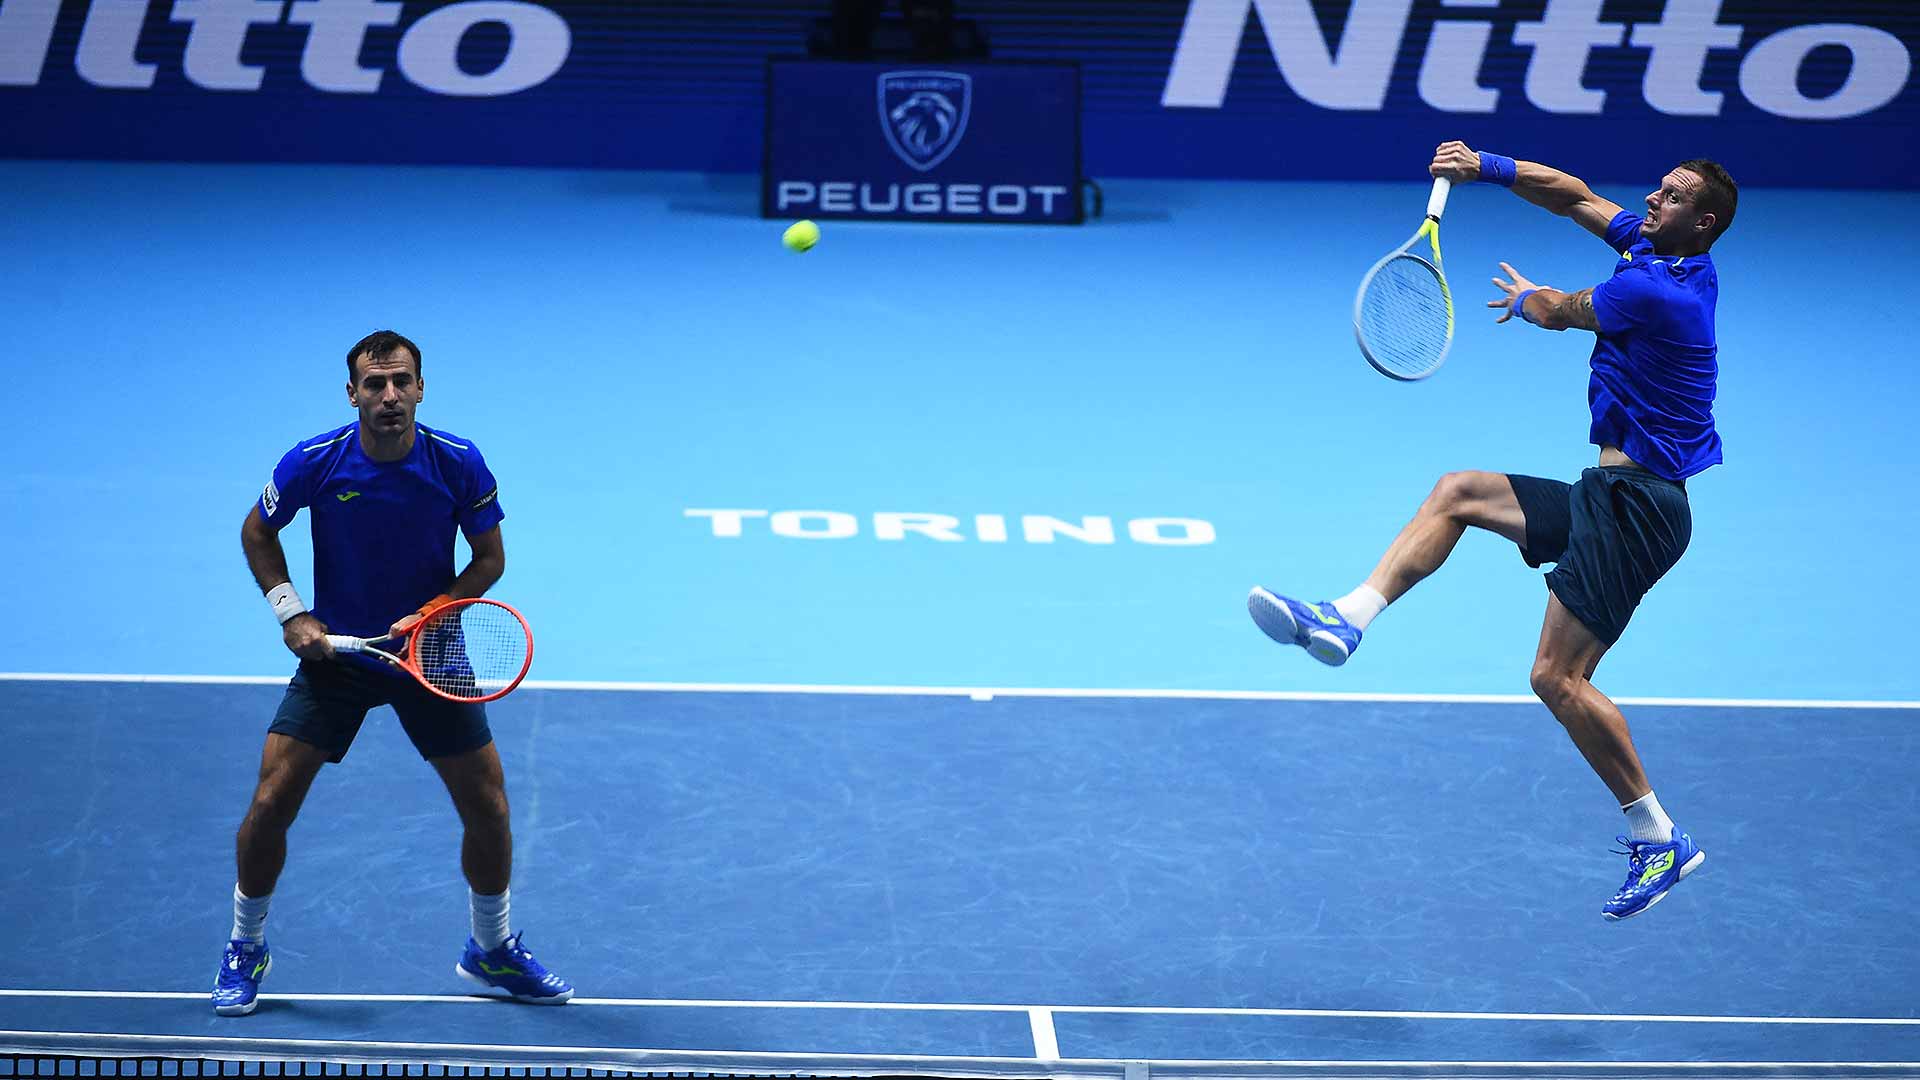 Ivan Dodig and Filip Polasek defeated Kevin Krawietz and Horia Tecau at the Nitto ATP Finals